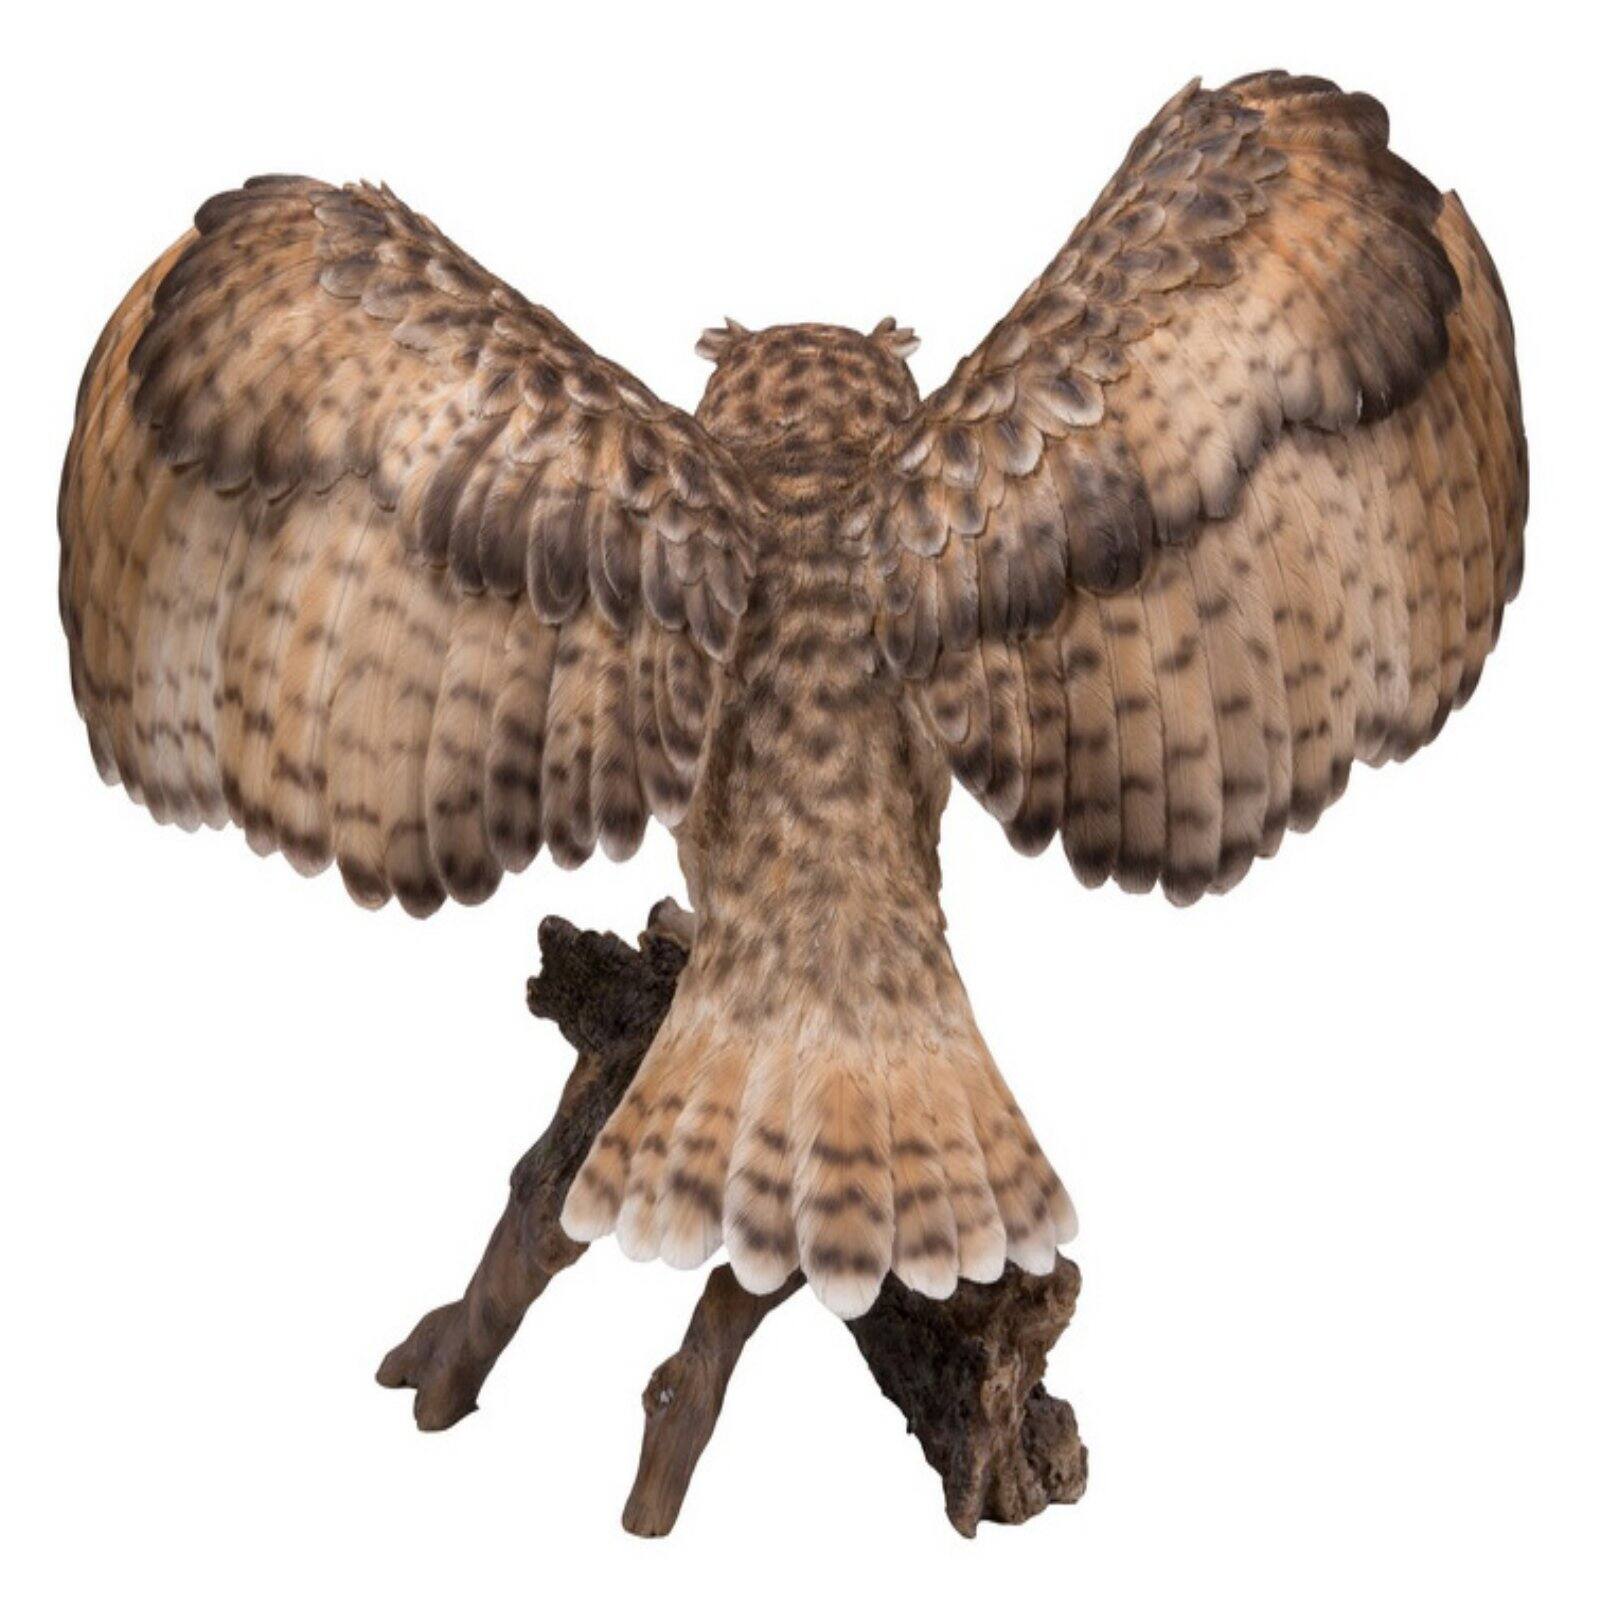 HI-LINE GIFT LTD. EAGLE OWL ON BRANCH W/WINGS OUT - image 3 of 5